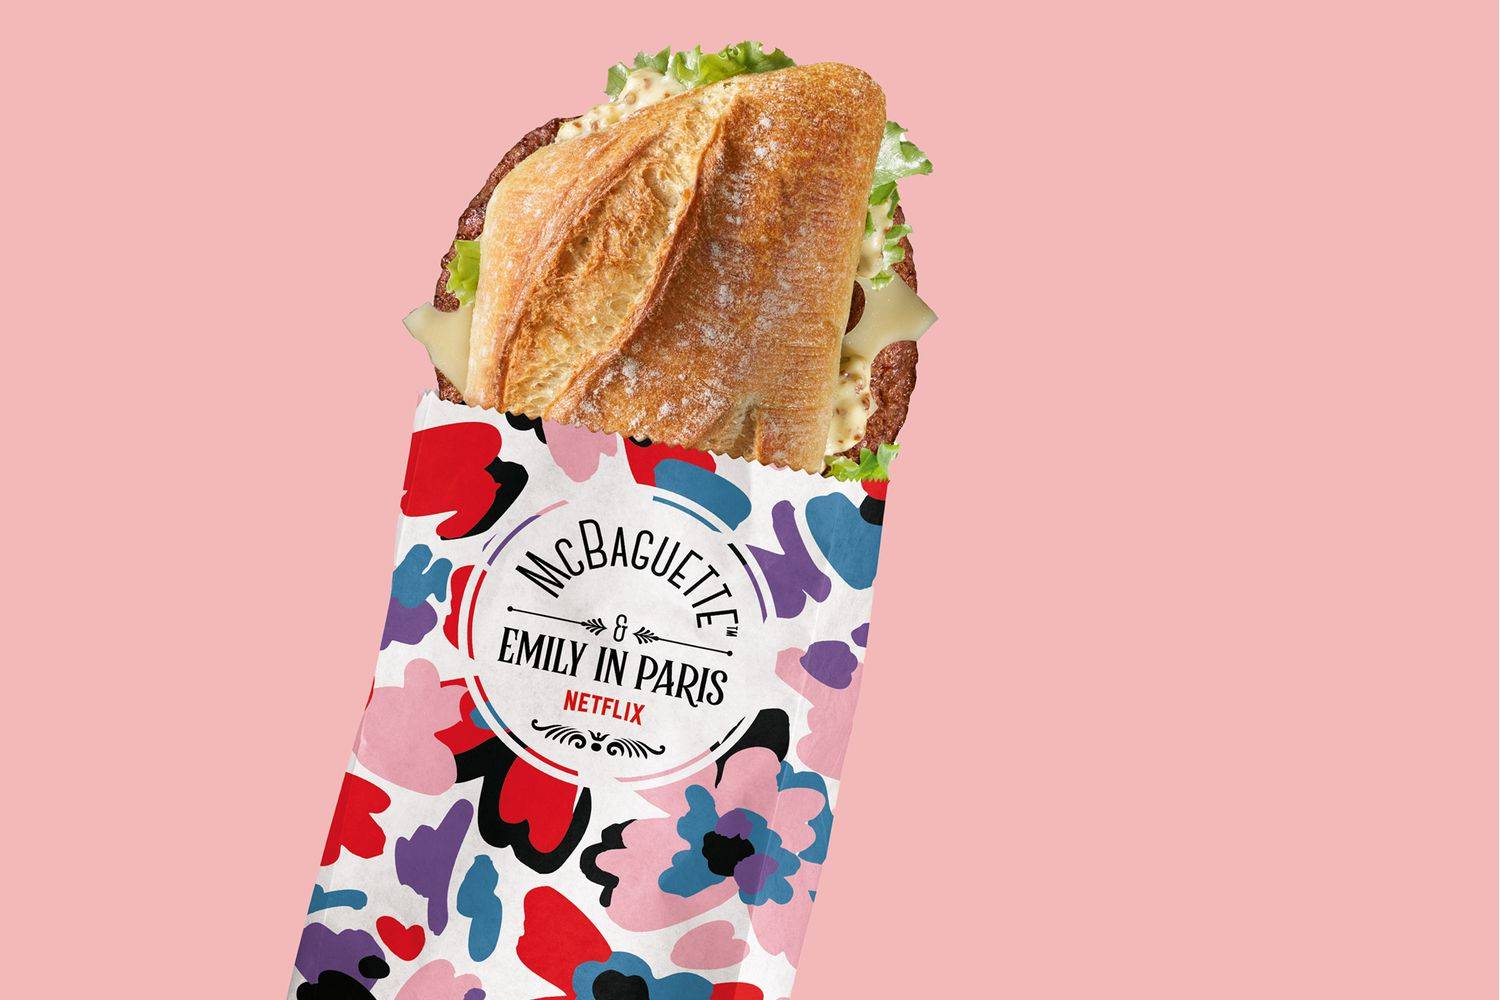 a baguette sandwich in packaging that says "McBaguette from Emily in Paris"